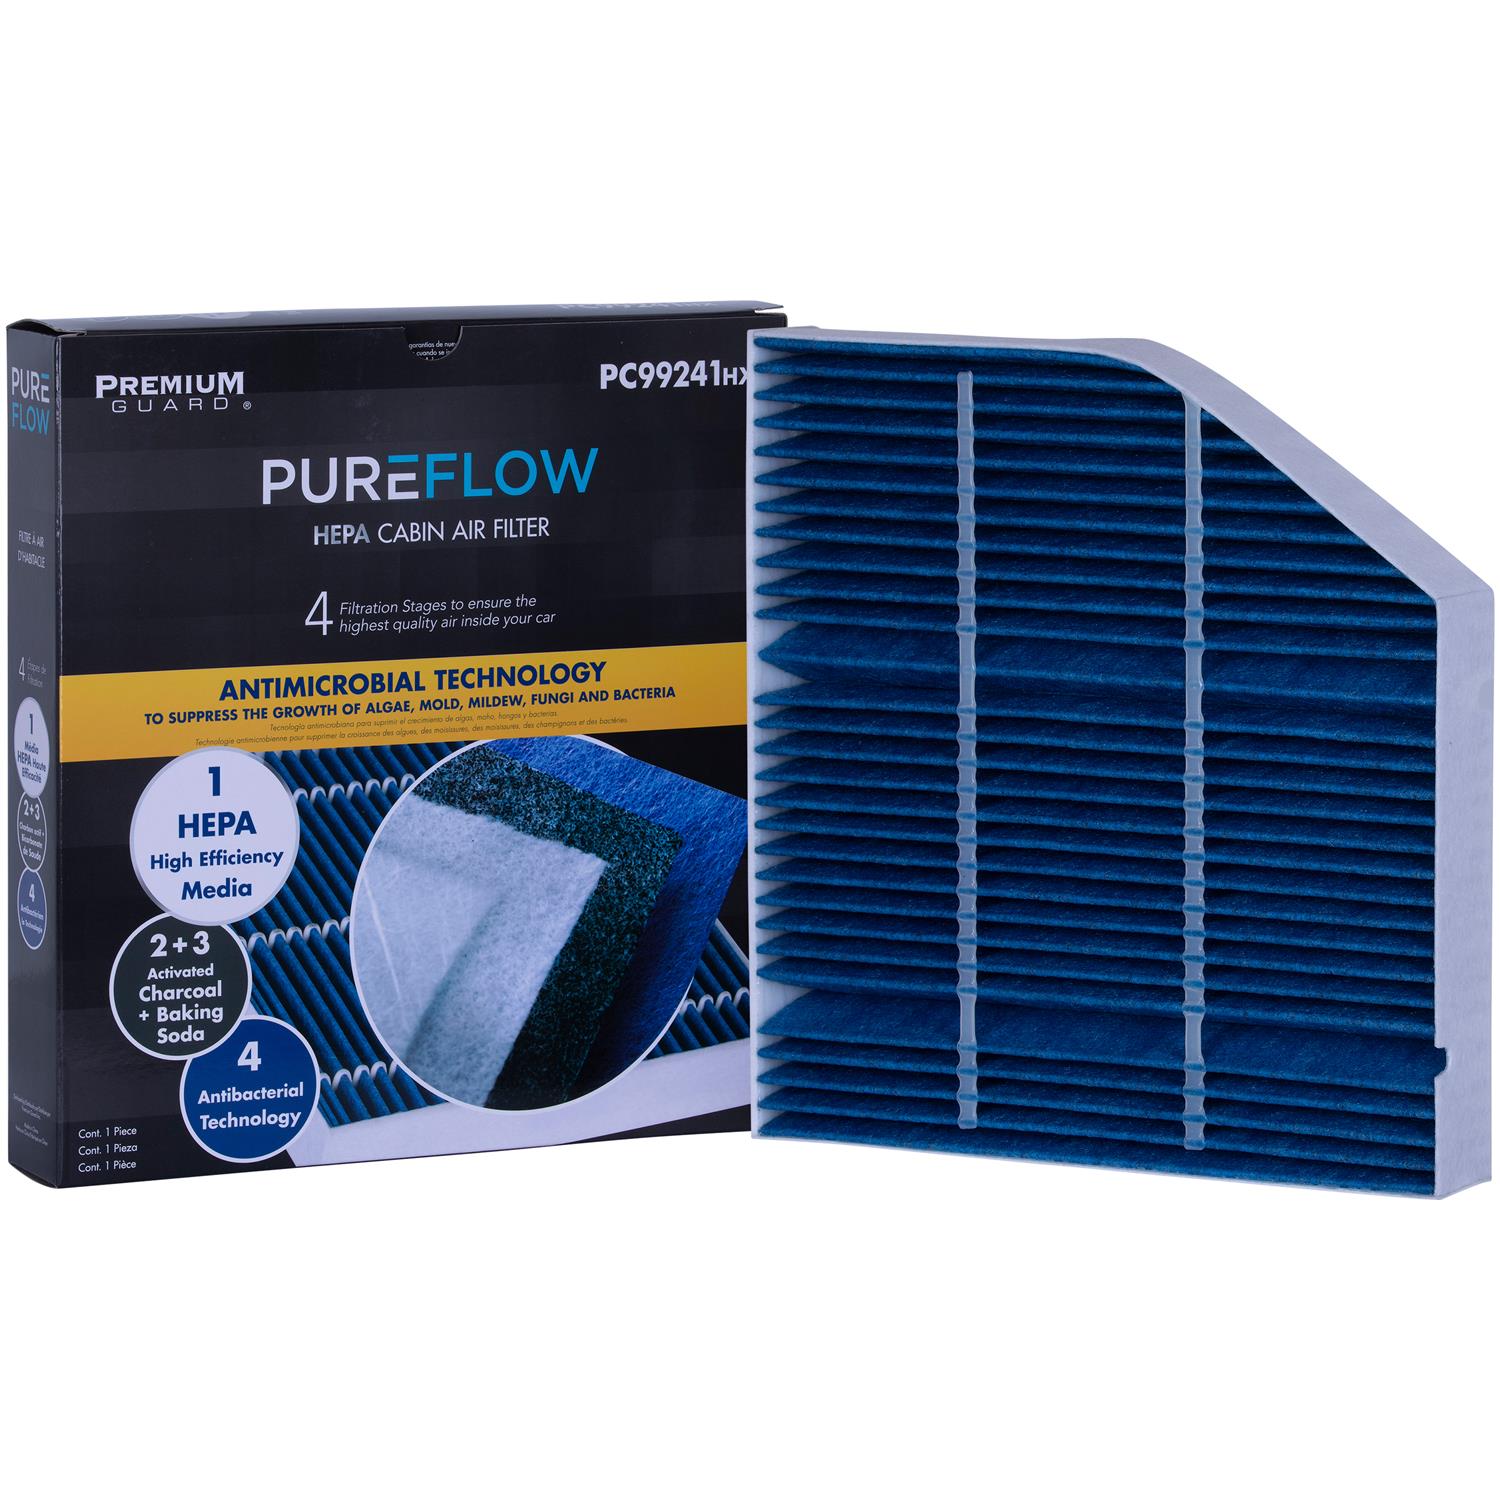 PUREFLOW 2020 Mercedes-Benz AMG GT 53 Cabin Air Filter with HEPA and Antibacterial Technology, PC99241HX